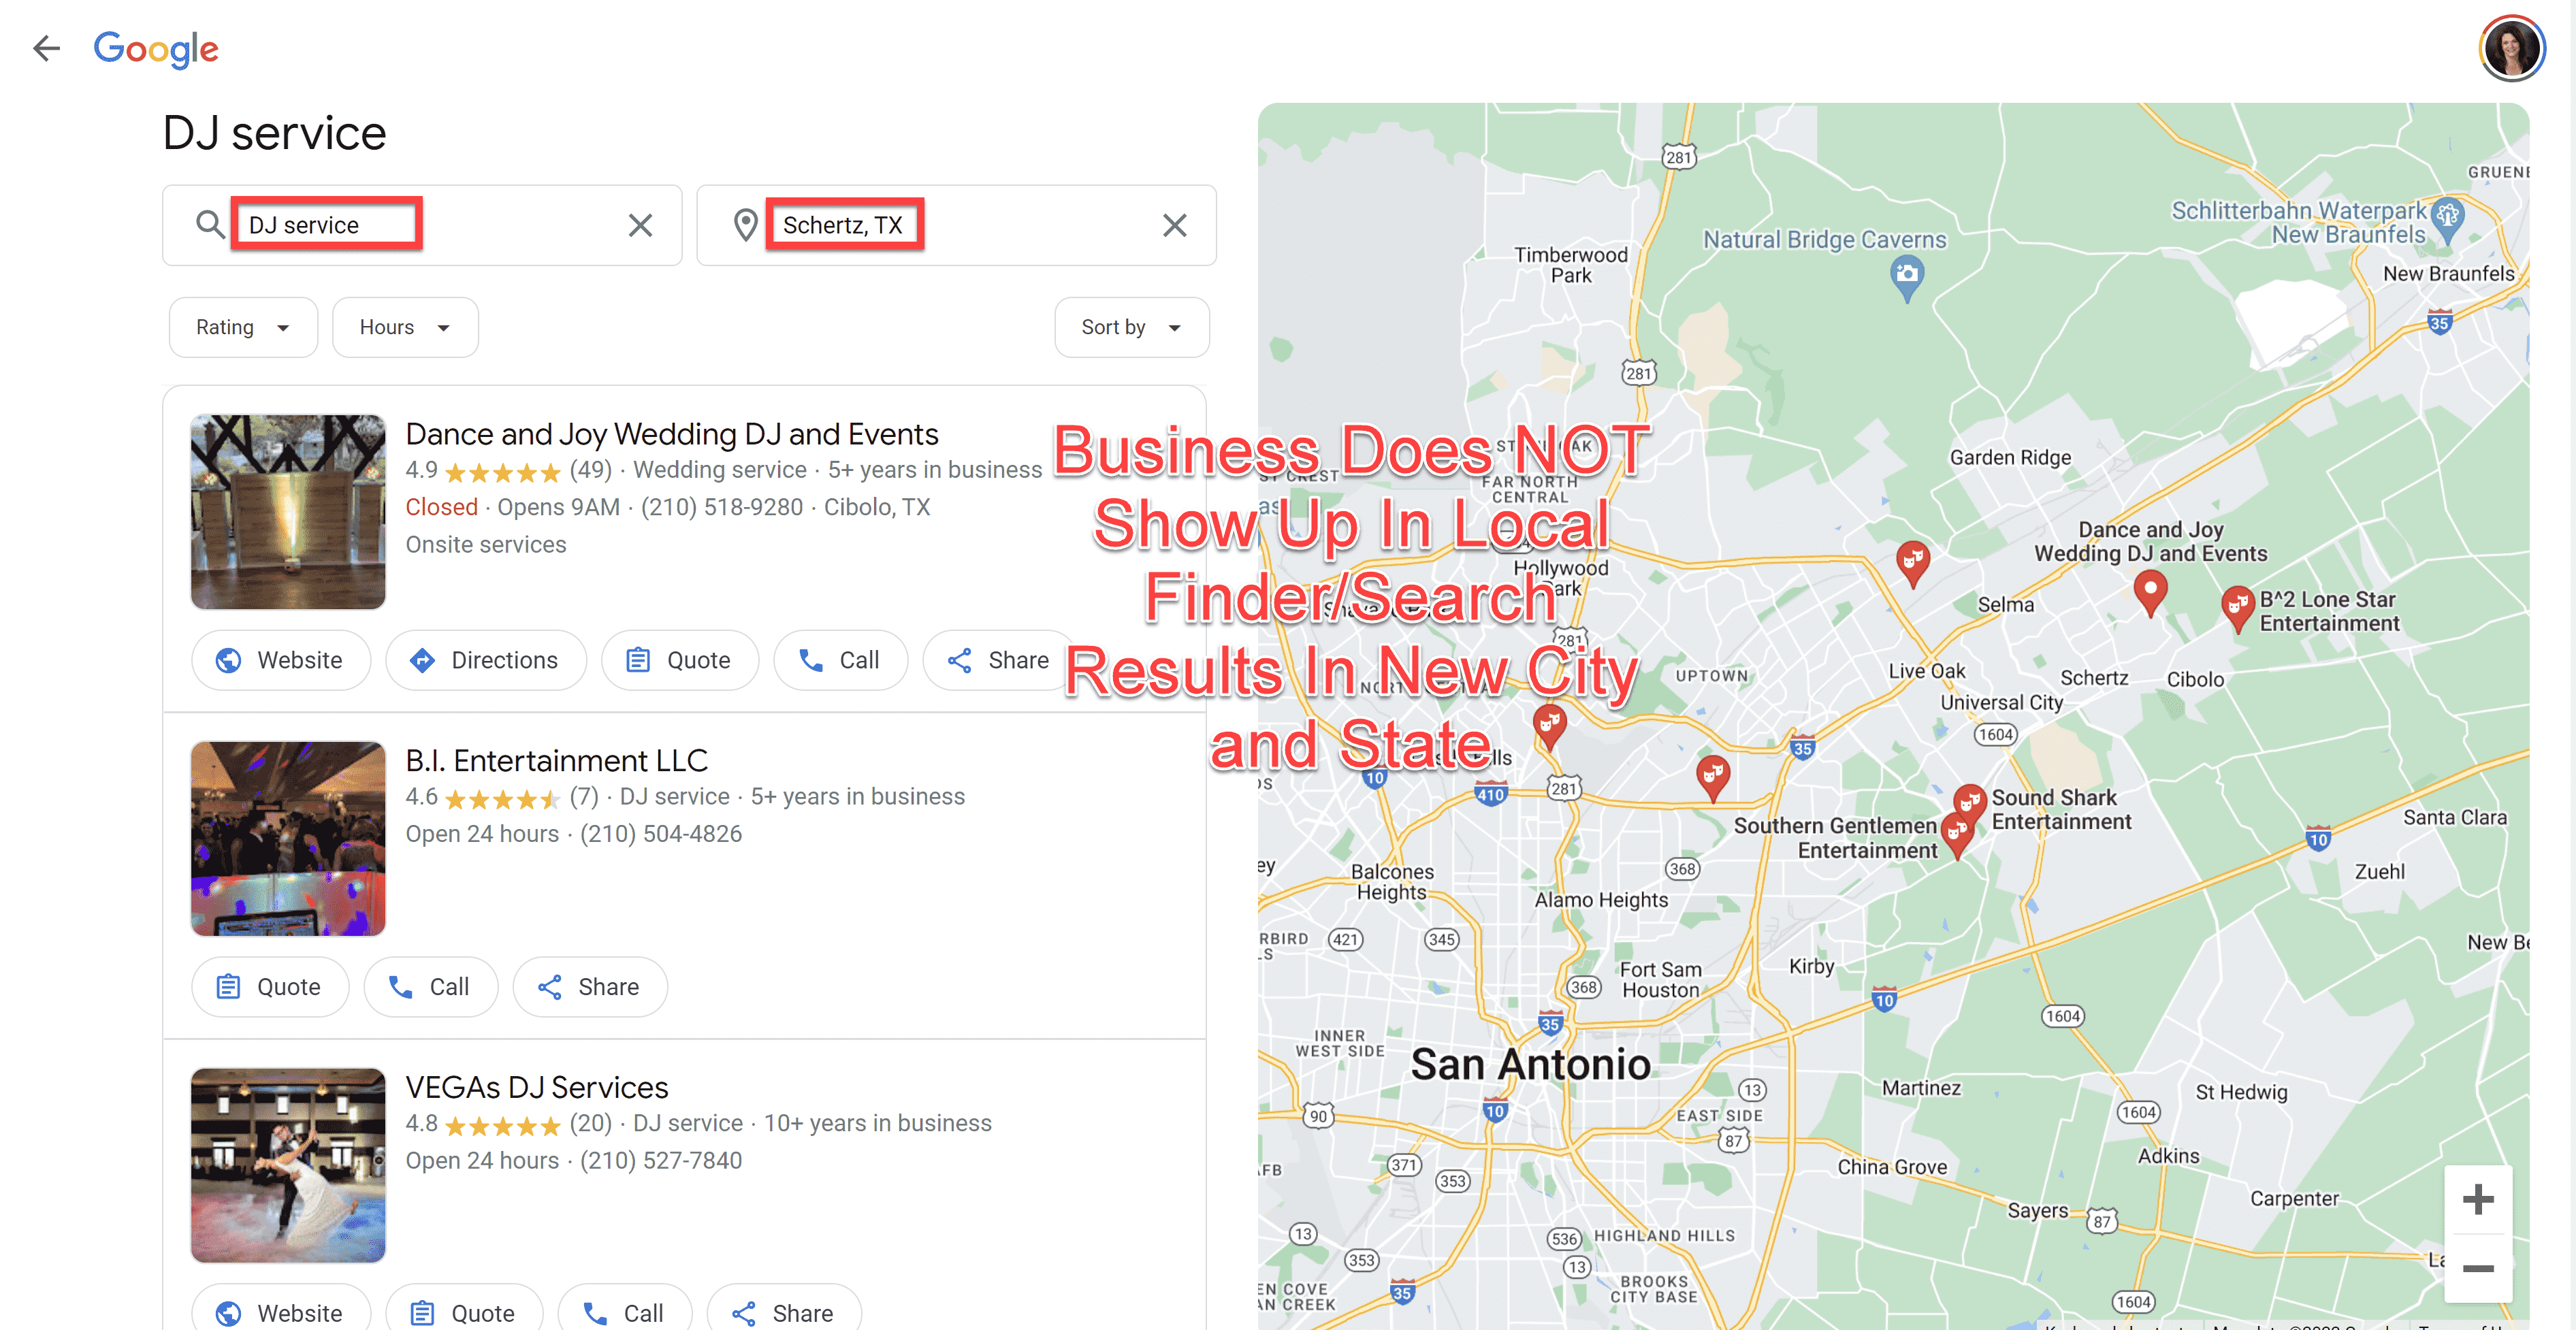 Service Area Business doesn't show up in search results for new location -- city and state